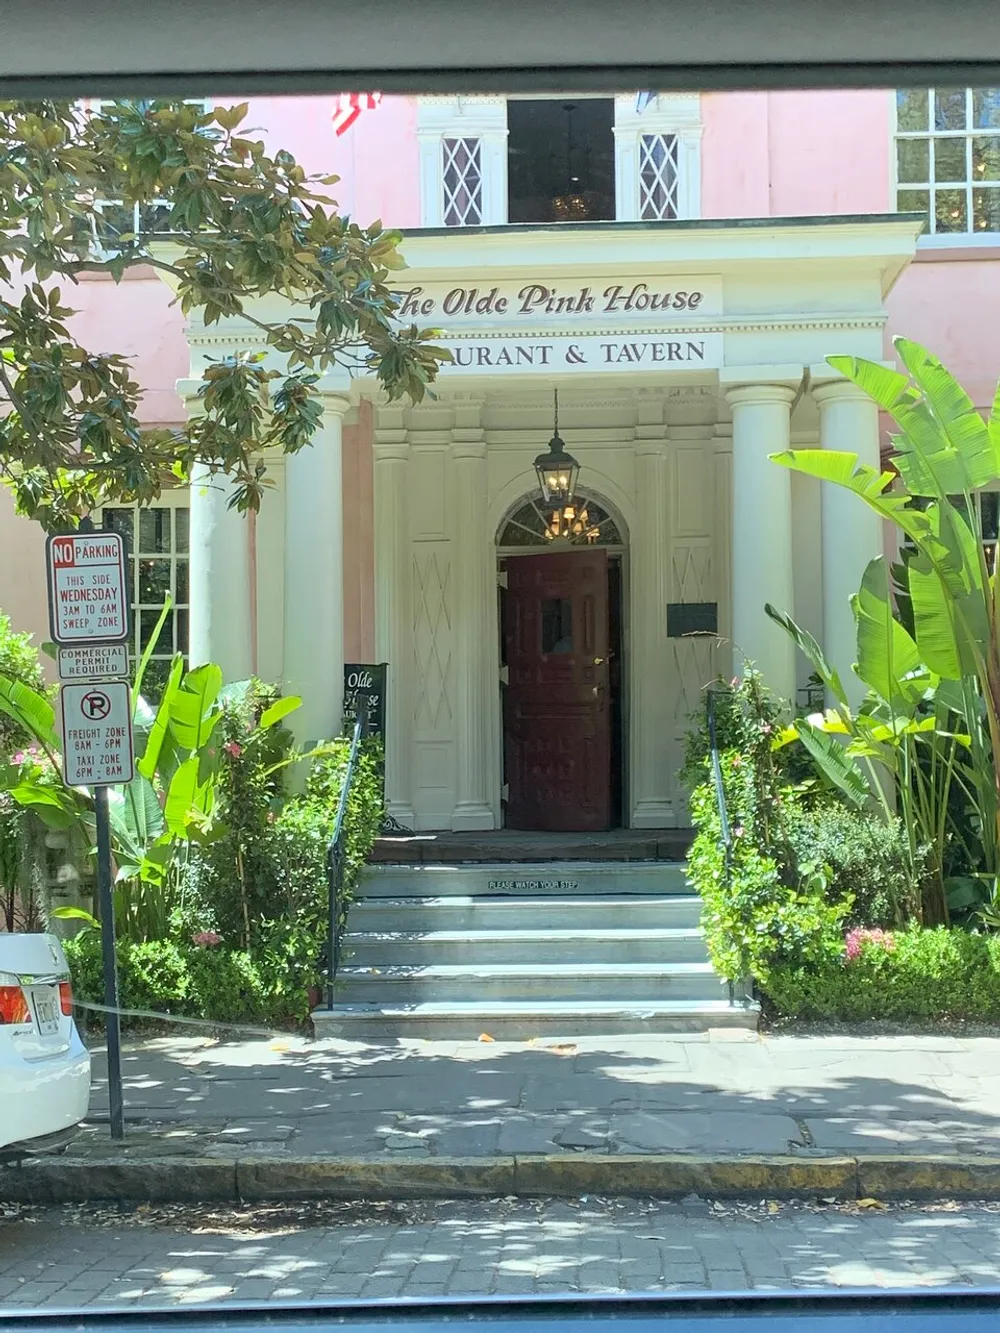 The image shows the entrance to The Olde Pink House Restaurant  Tavern a pink-colored historic building with white trim a red door and greenery flanking the steps